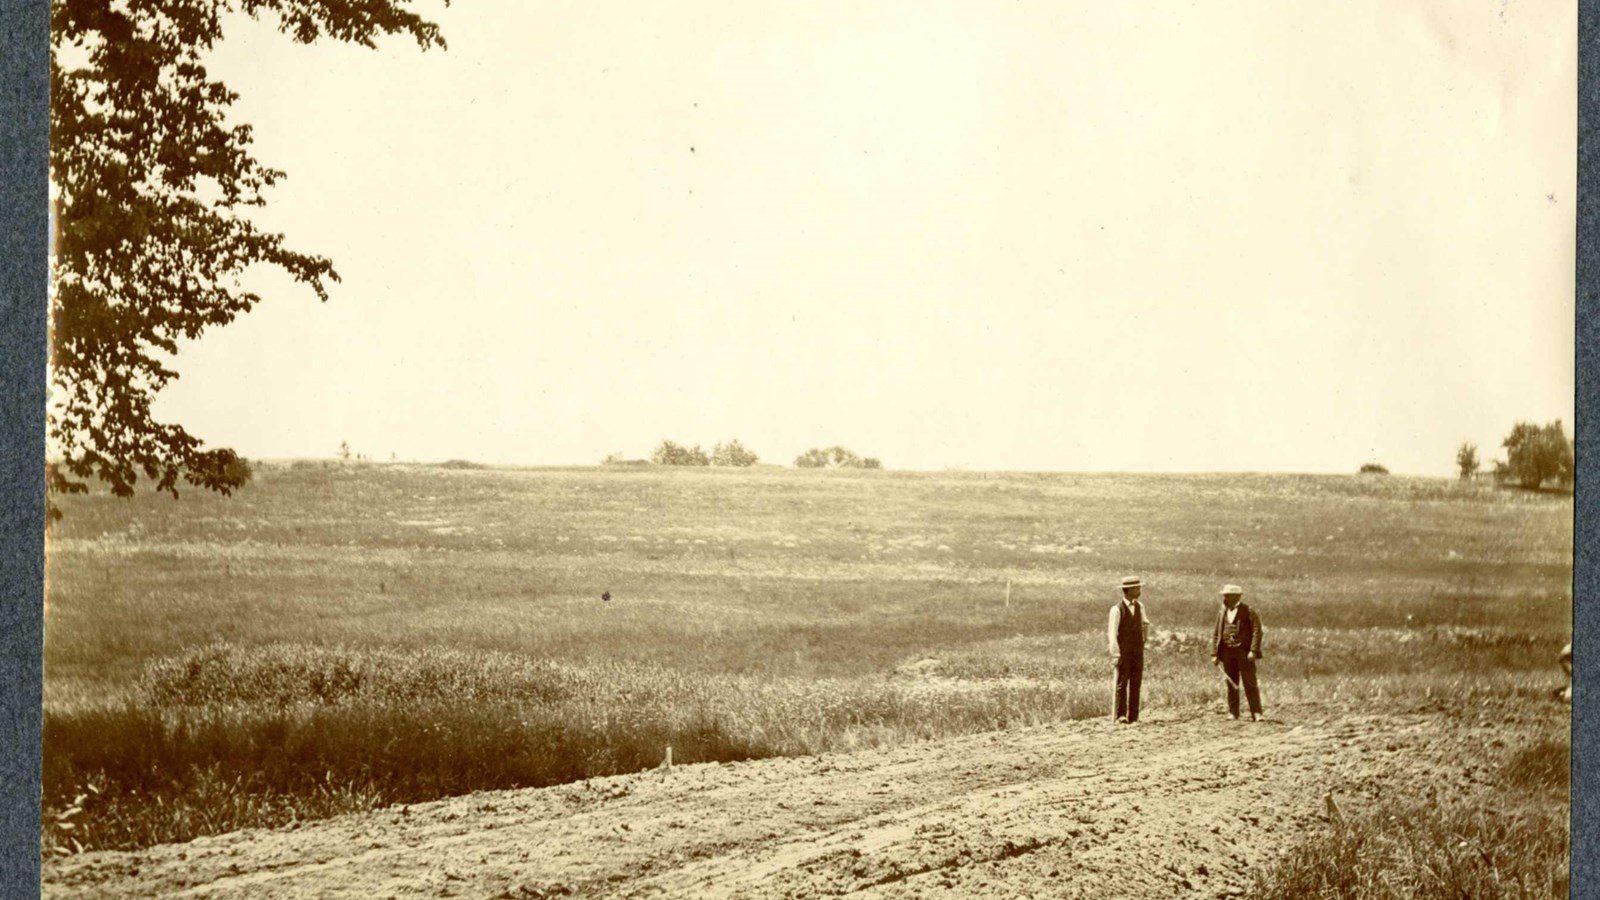 Black and white of dirt road at end of grassy hill with two people standing on it